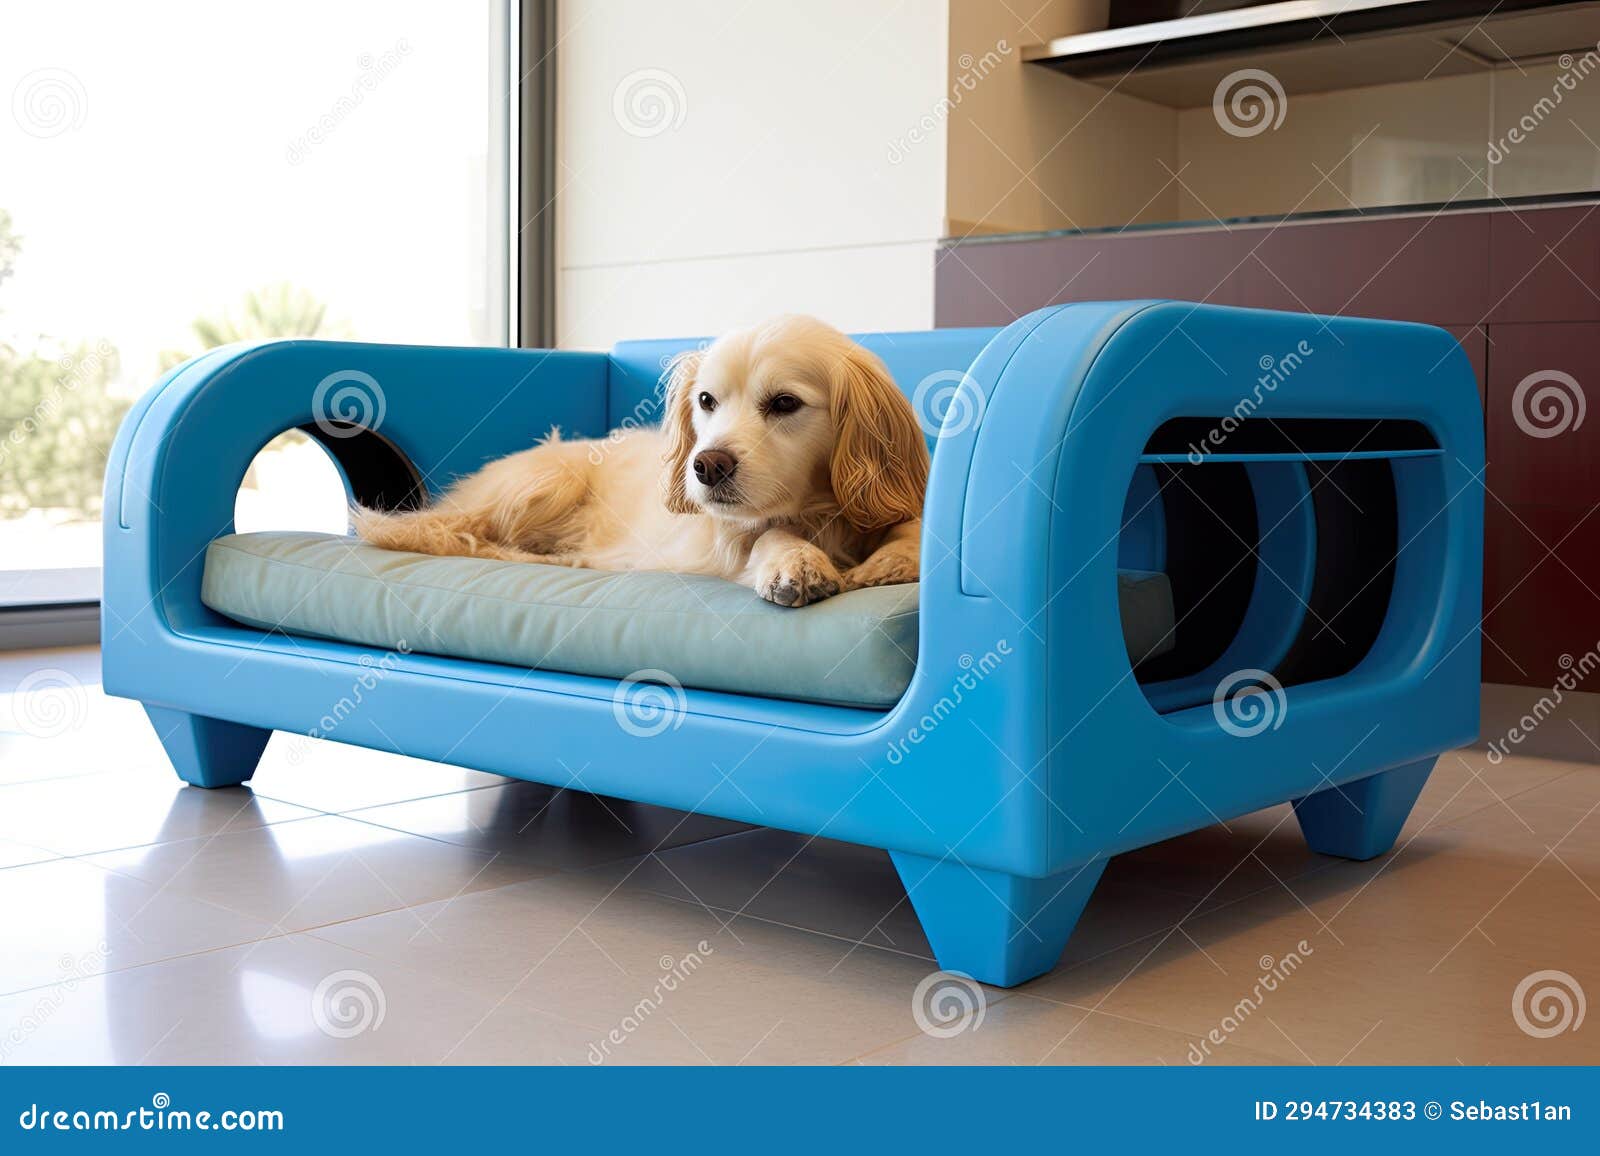 dog on a sofa represents the epitome of homey comfort and domestic bliss.